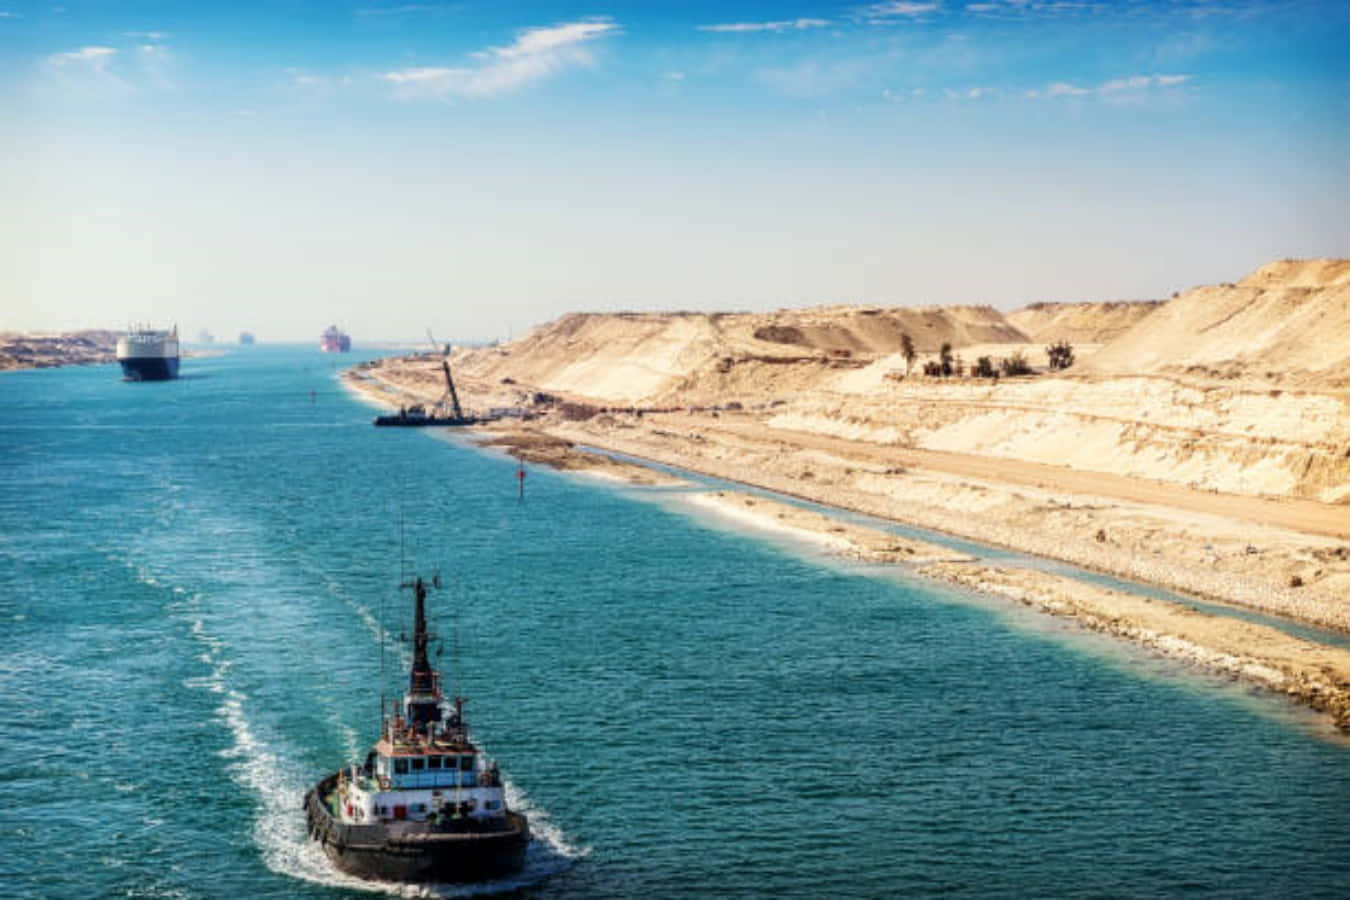 Ships passing through the Suez Canal, a vital trade route linking the Mediterranean Sea to the Red Sea